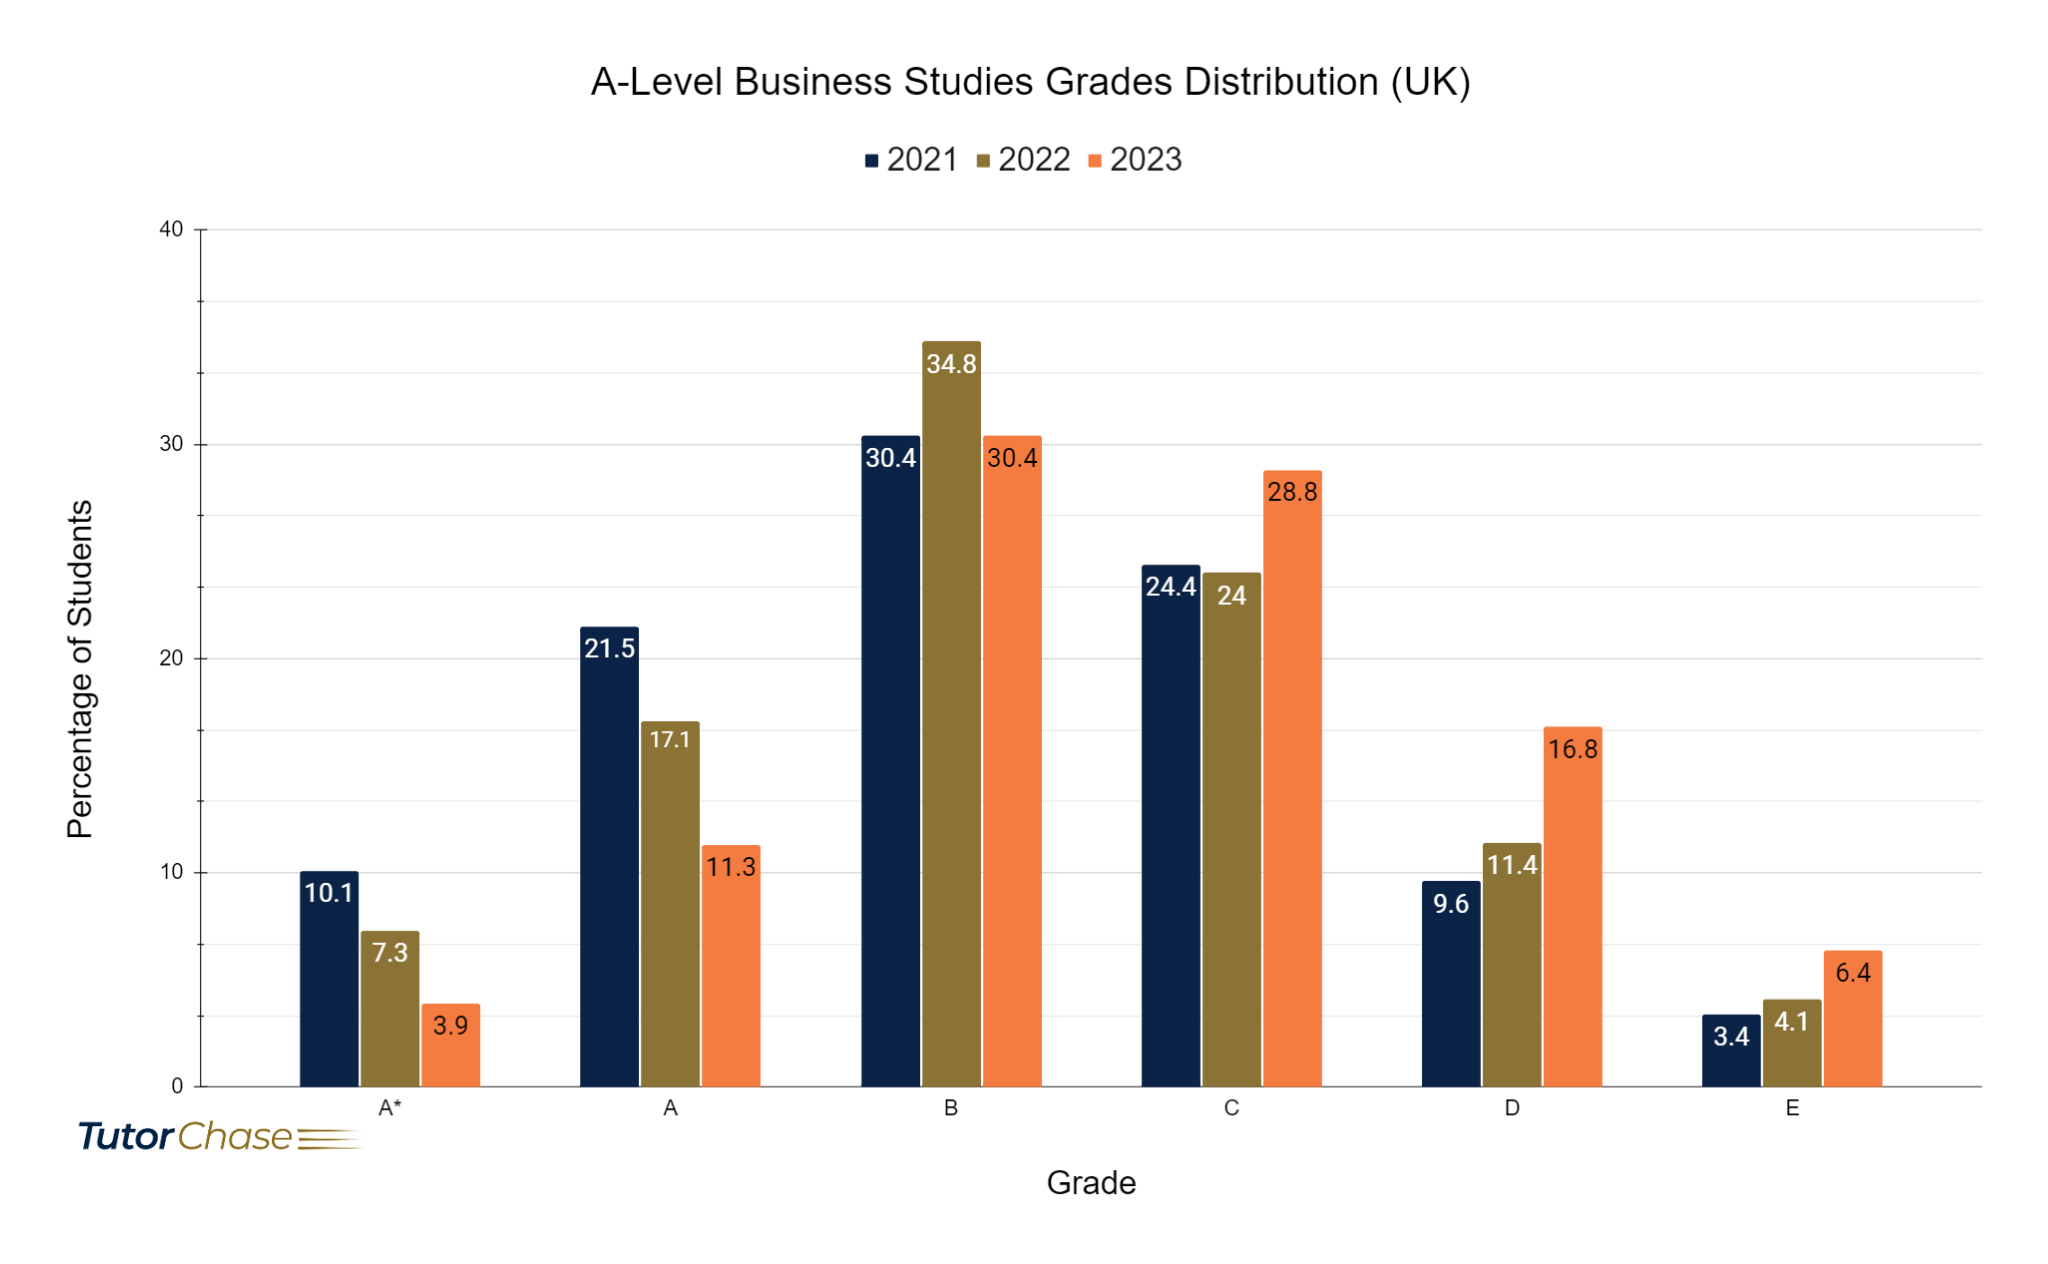 Grades distribution of A-Level Business Studies in UK 2021-2023